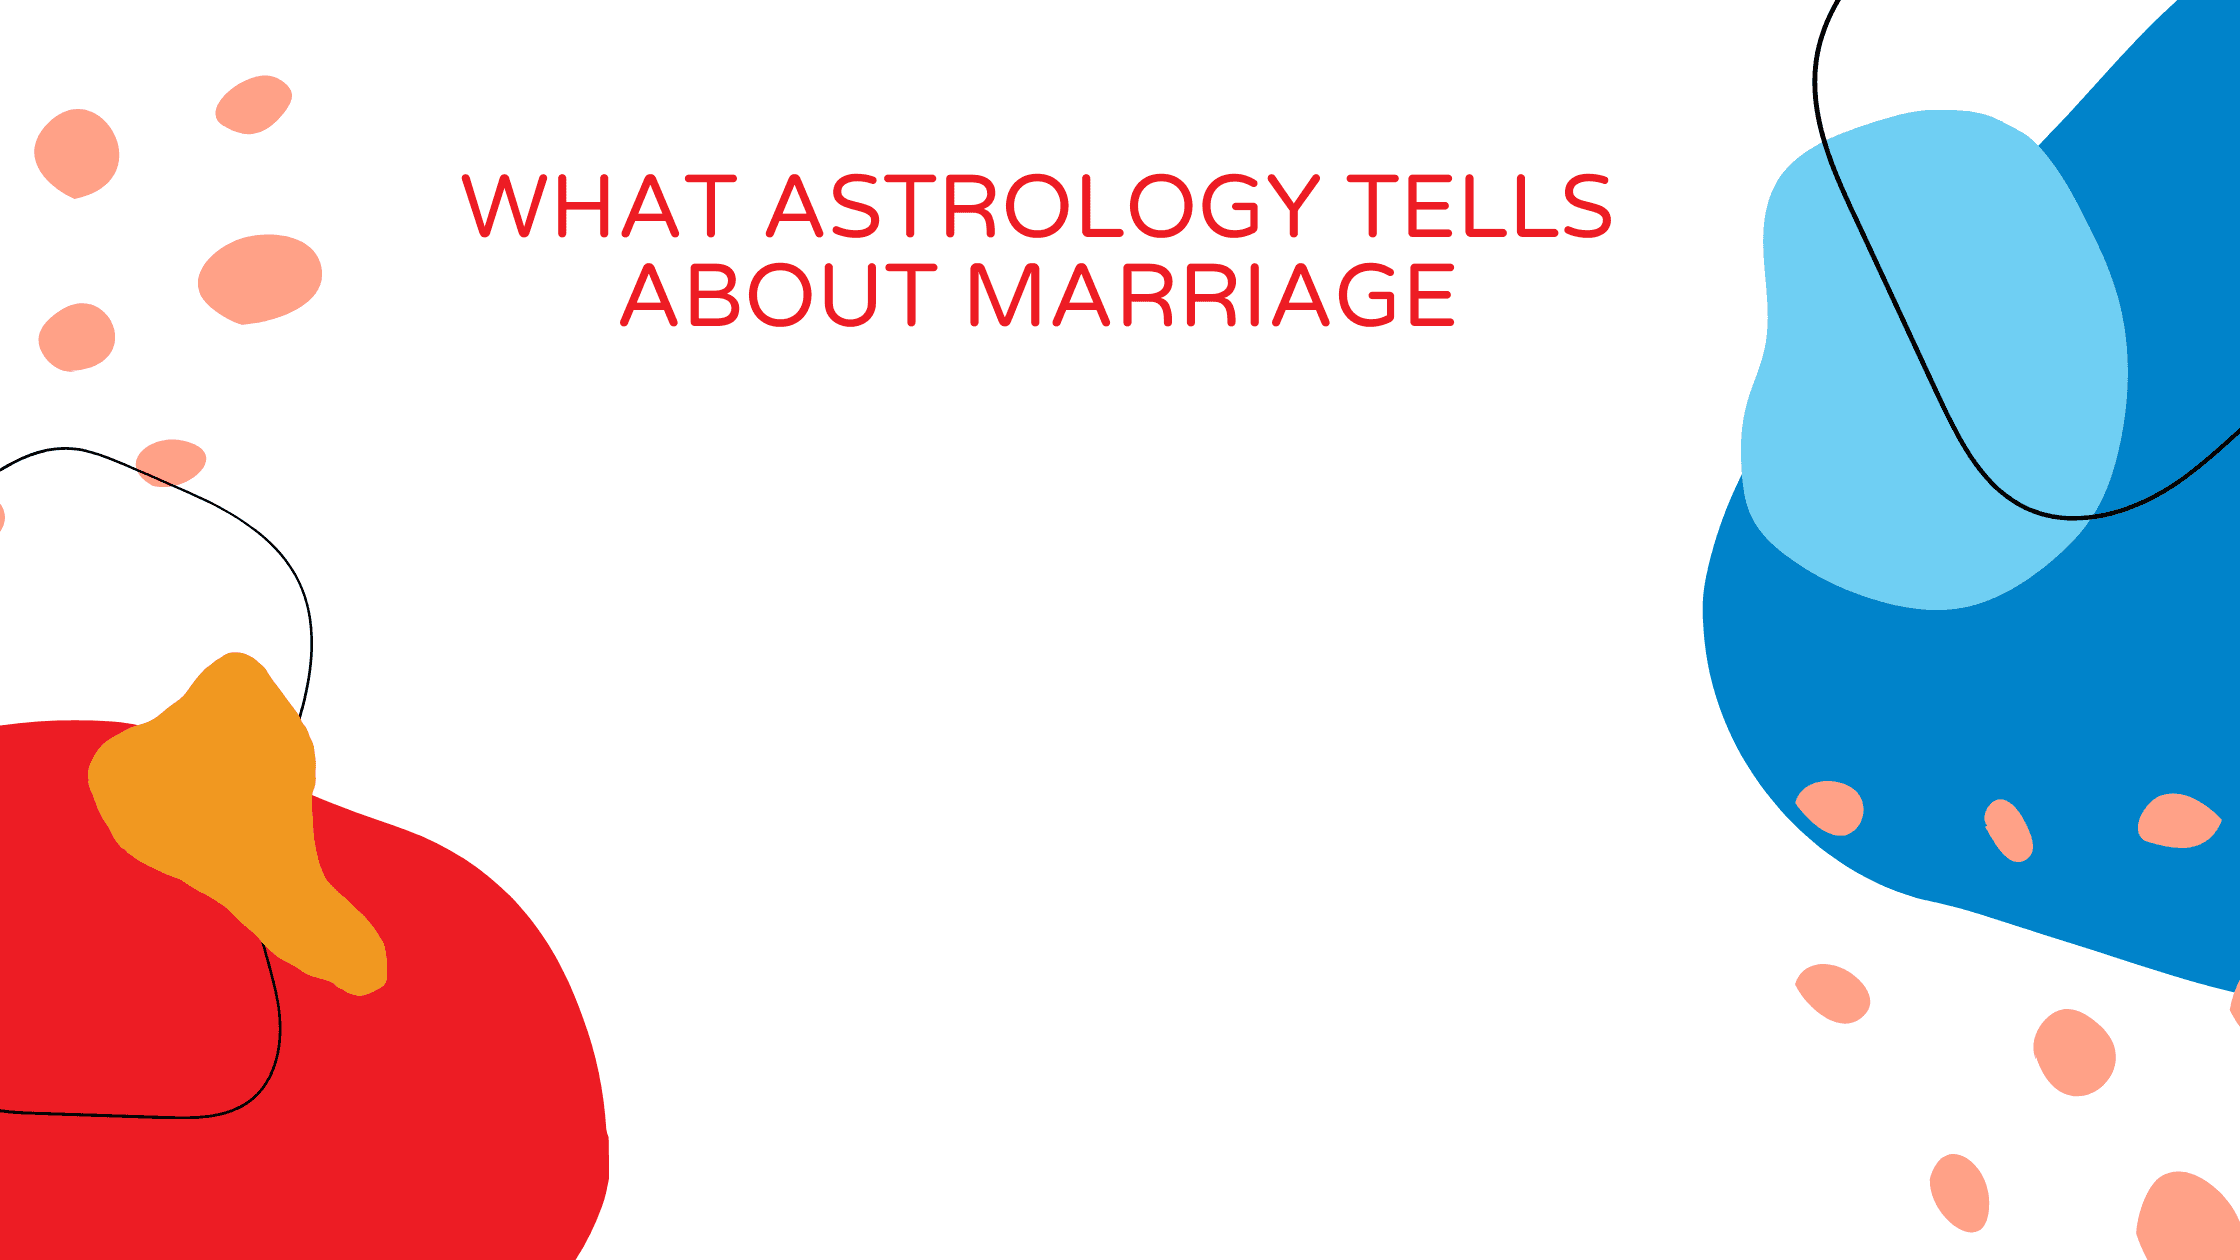 What Astrology Tells About Marriage